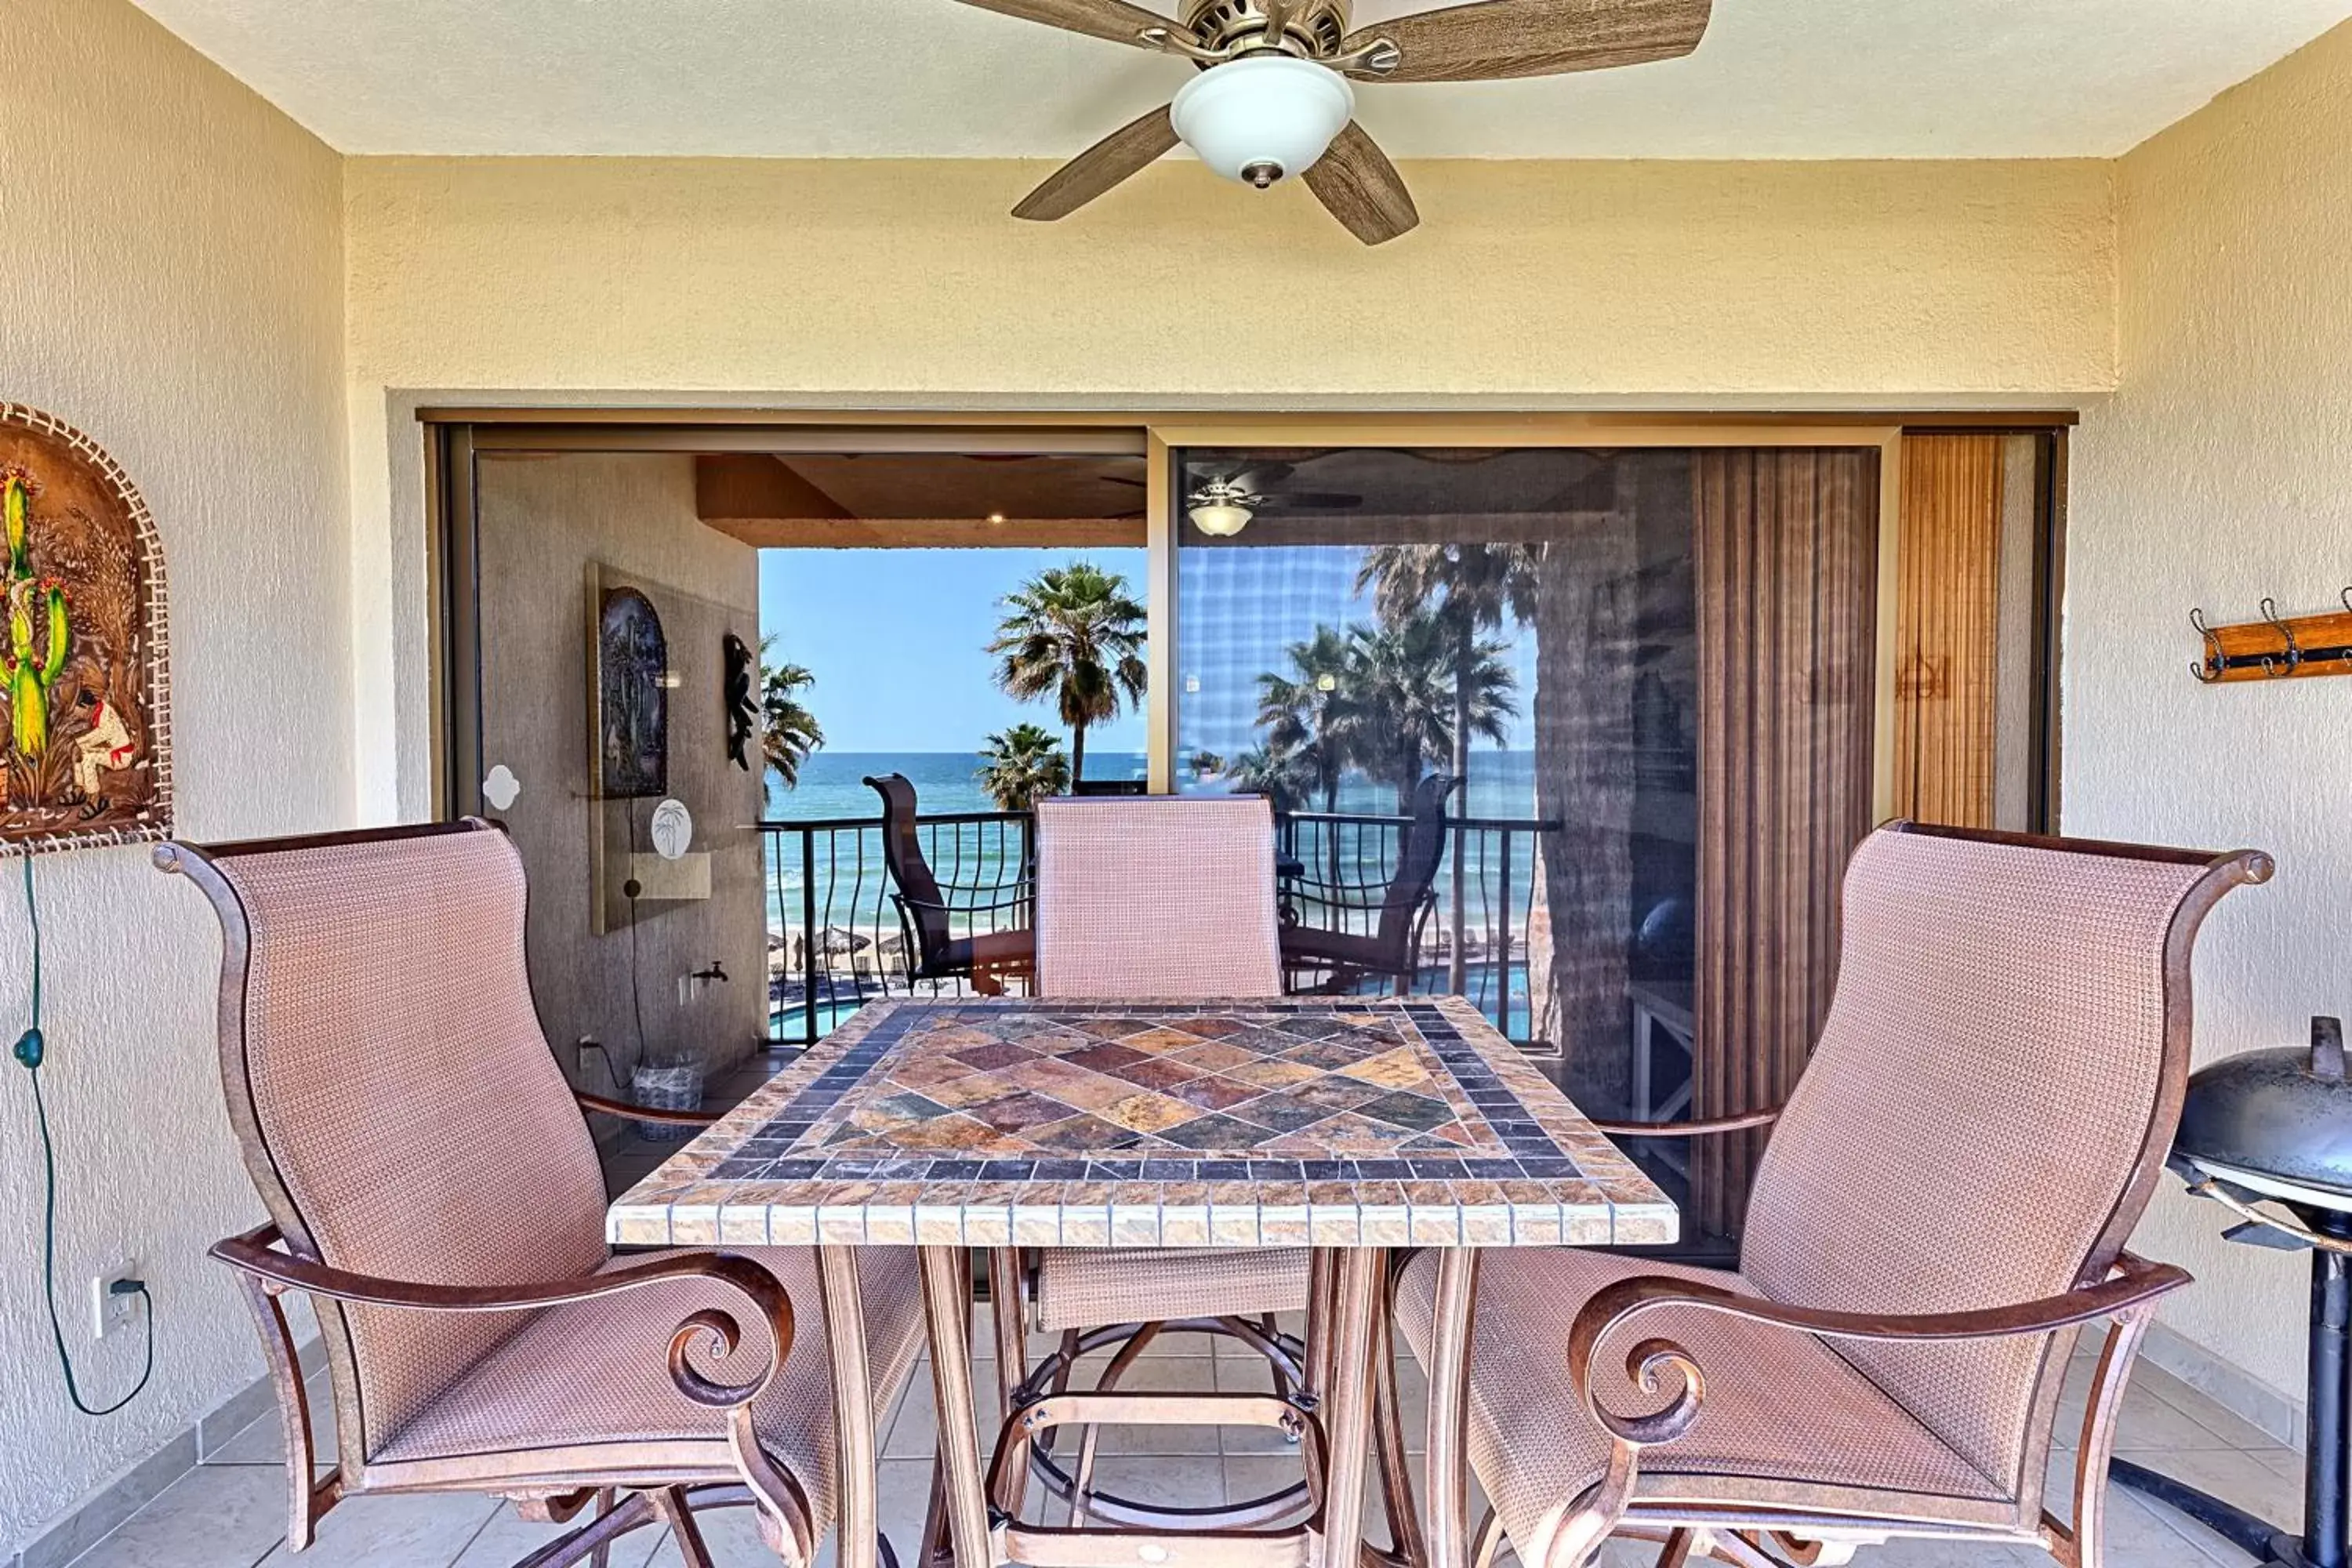 View (from property/room) in Sonoran Sea 310-W - Modern 1 bedroom